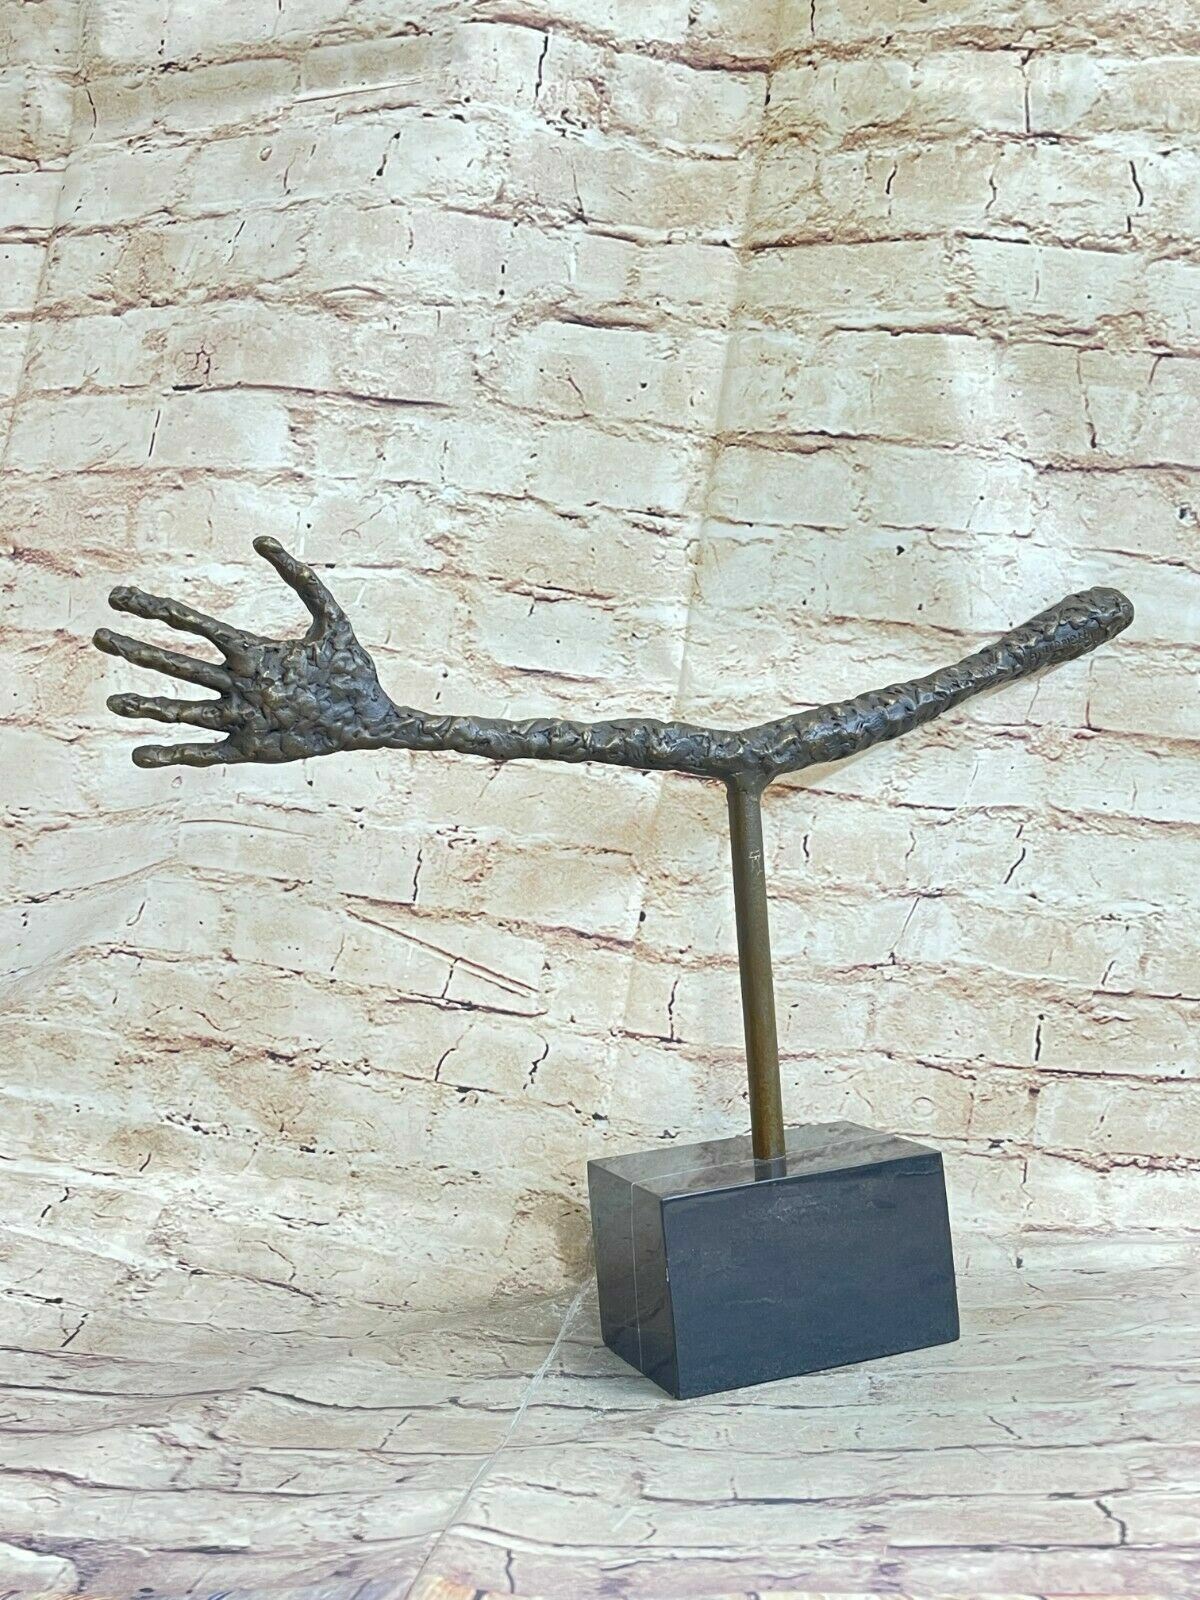 Handcrafted Bronze Sculpture Cubist Abstract Hand by Gia Lost Wax Method Artwork